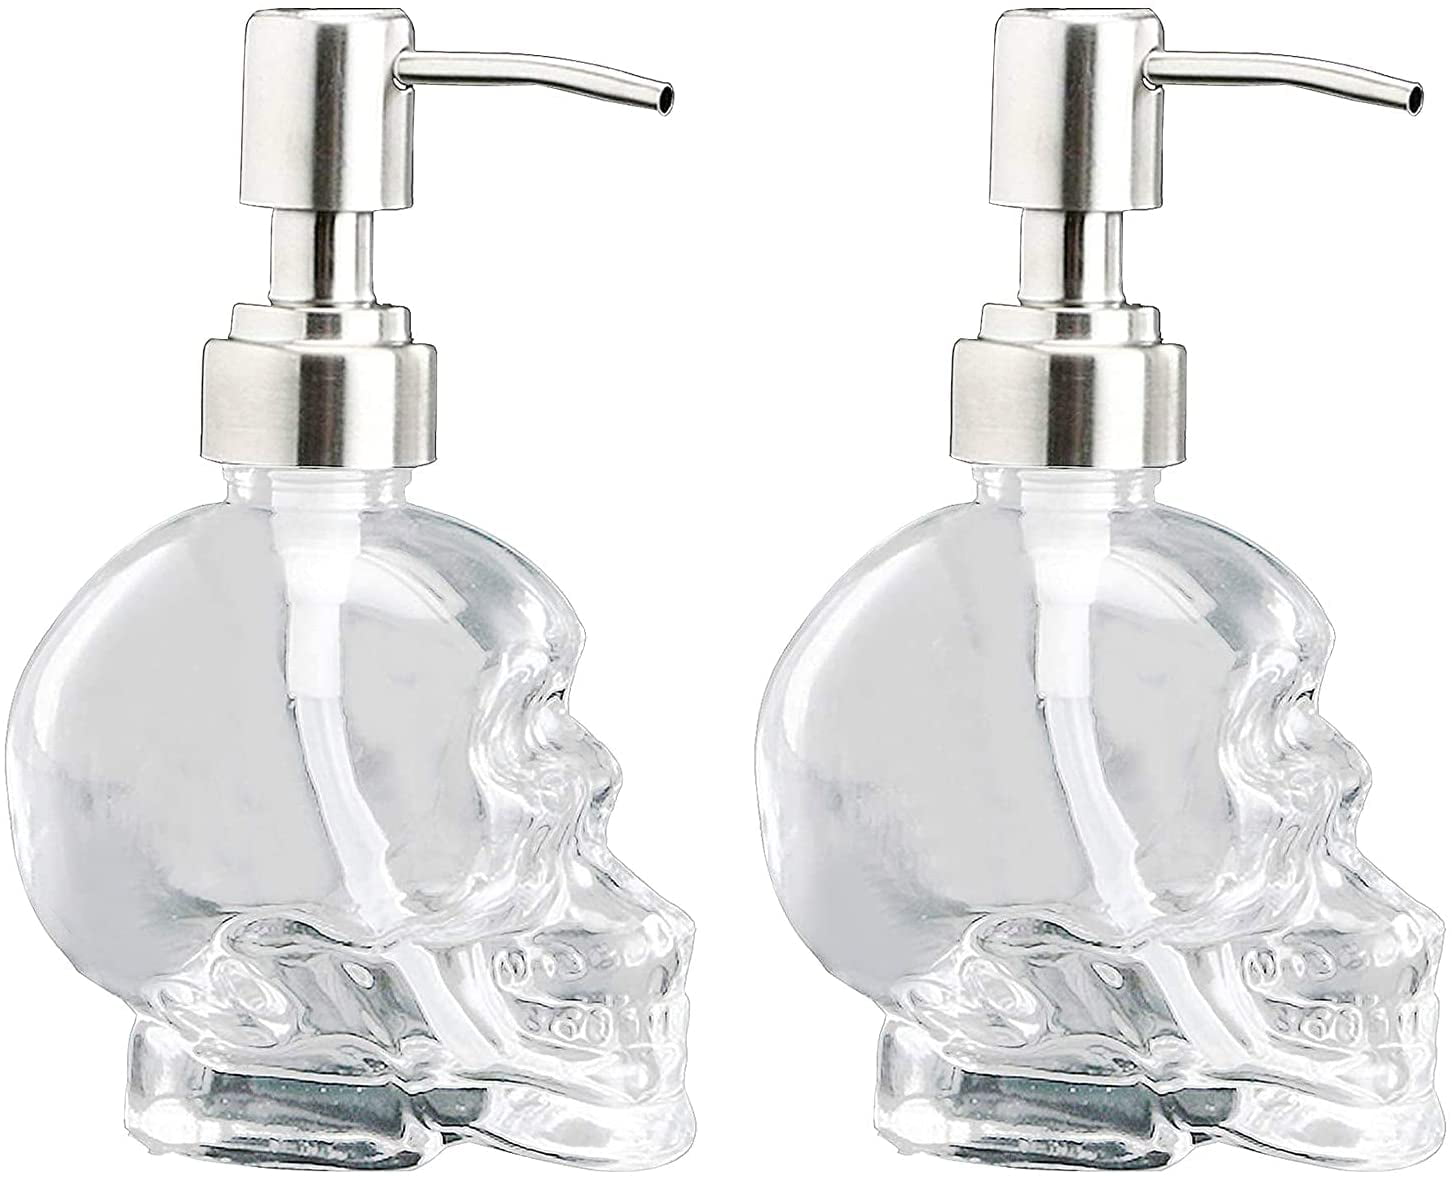 prosfalt 2 Pack Chirstmas Skull Soap Dispenser,Clear Glass Pump Bottle with Rust Proof Stainless Steel Pump,Refillable Soap Dispenser for Bathroom Kitchen Decor 